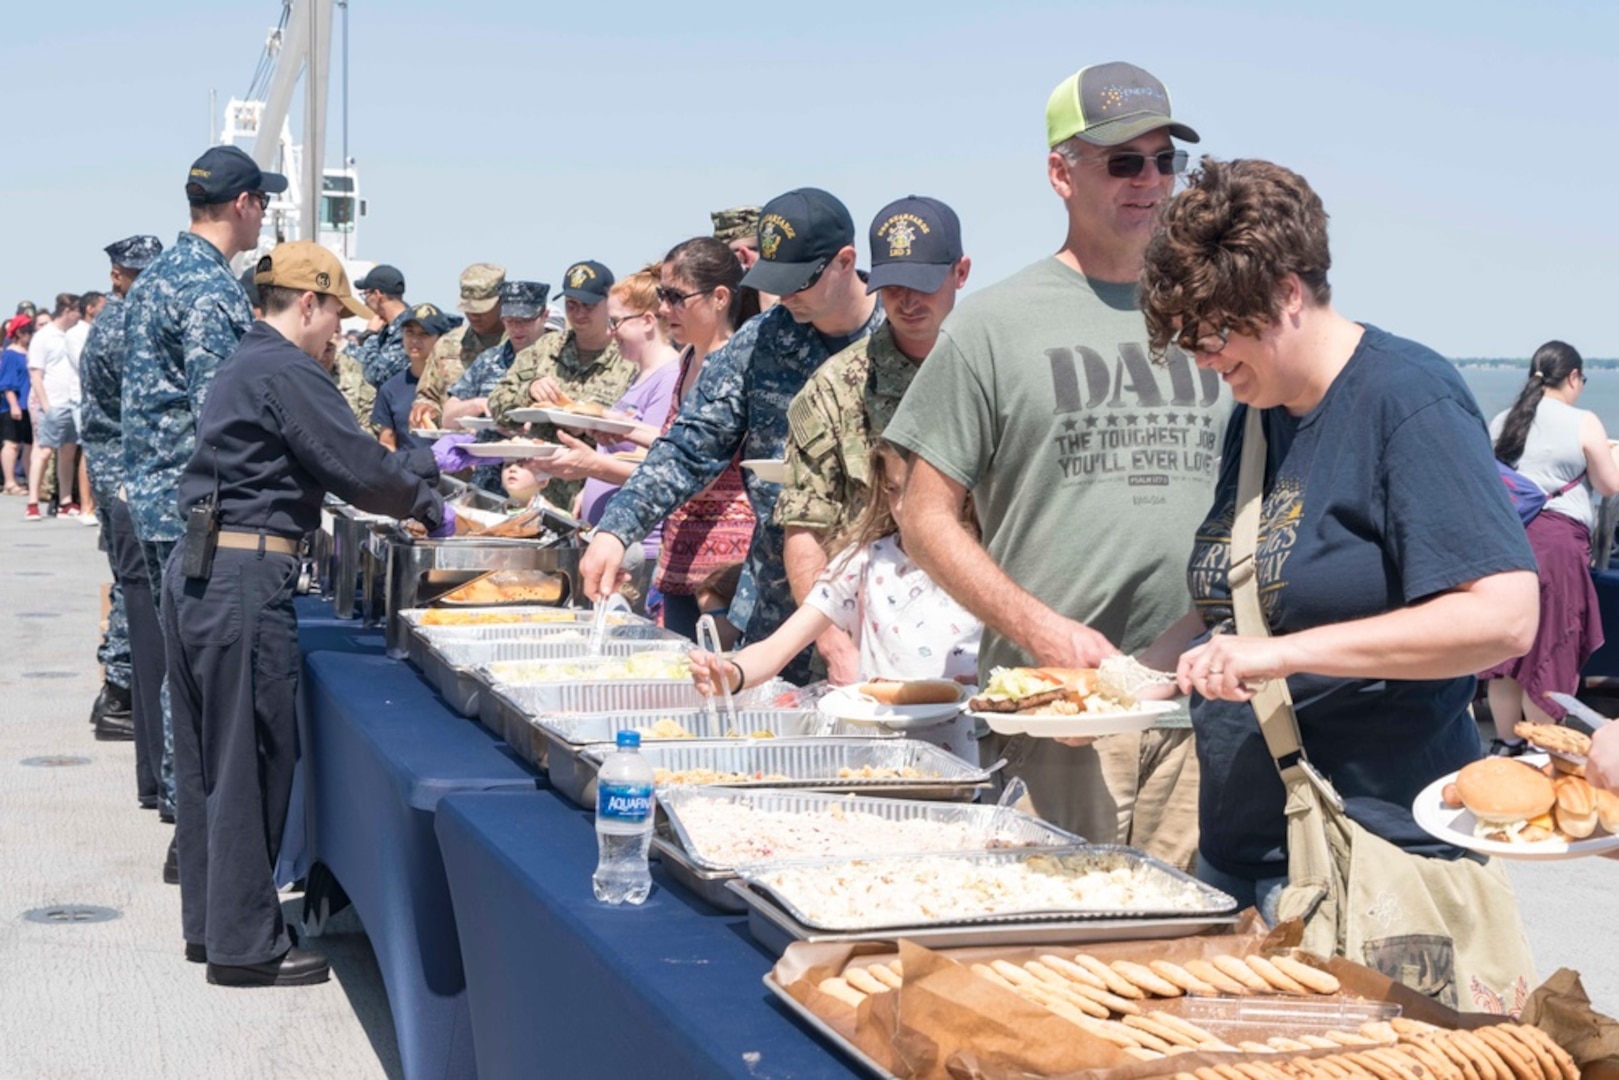 Sailors assigned to the Wasp-class amphibious assault ship USS Kearsarge (LHD 3) serve food during a Friends and Family Day event hosted aboard Kearsarge. The officers and crew of Kearsarge hosted a Friends and Family Day event to display their operational capabilities to their loved ones. (U.S. Navy Photo by MC3 Kaitlyn E. Eads/Released)